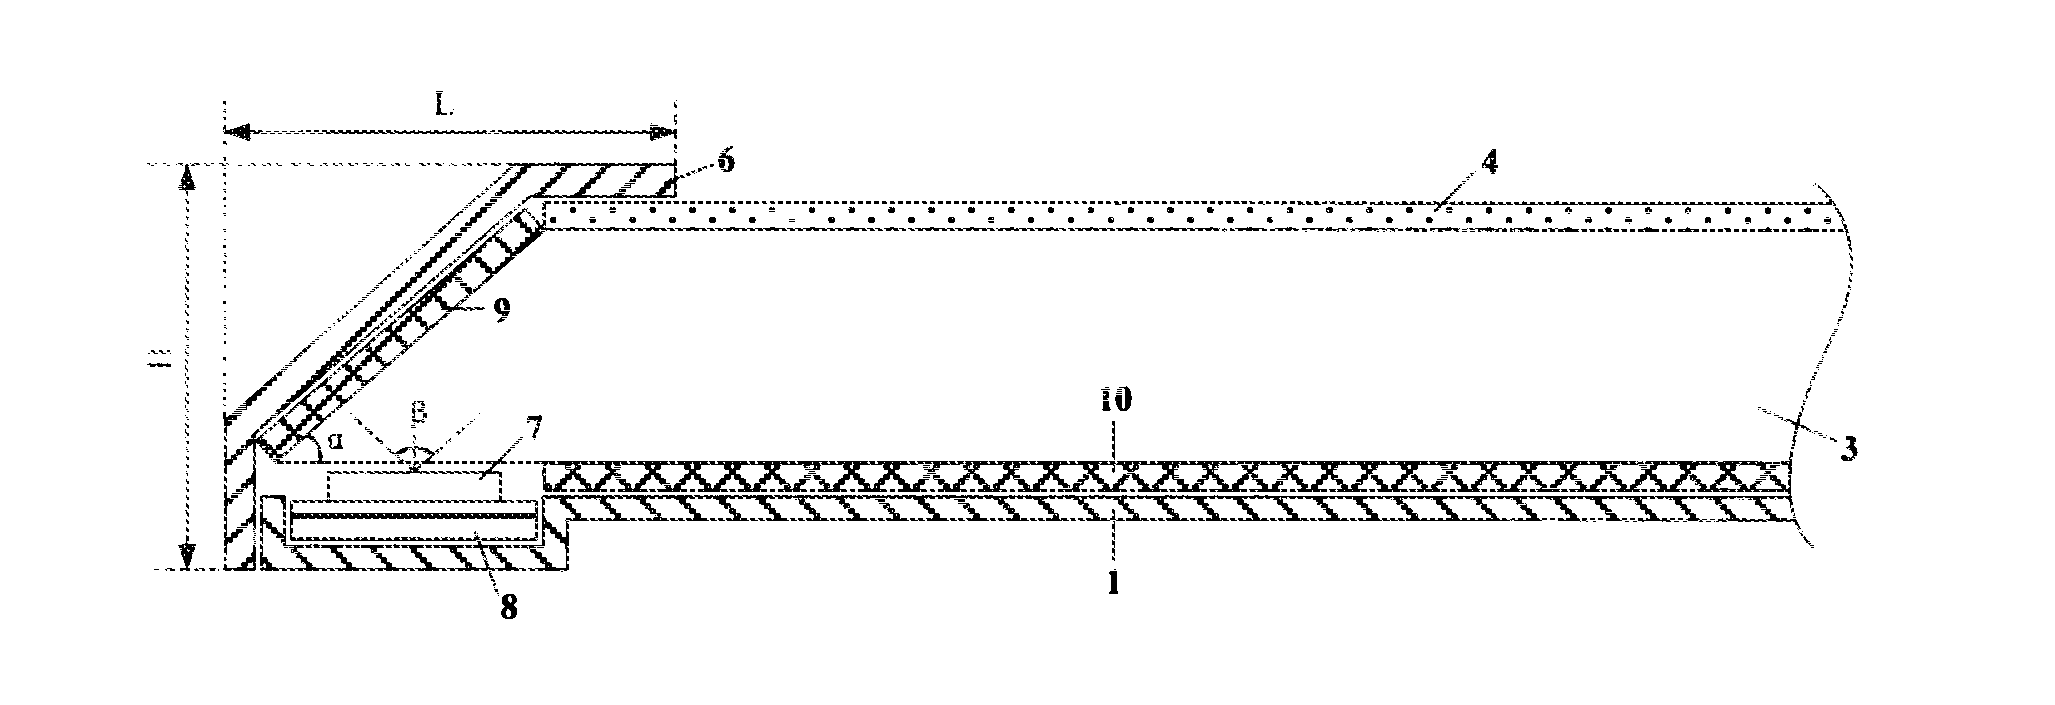 Backlight unit and display device